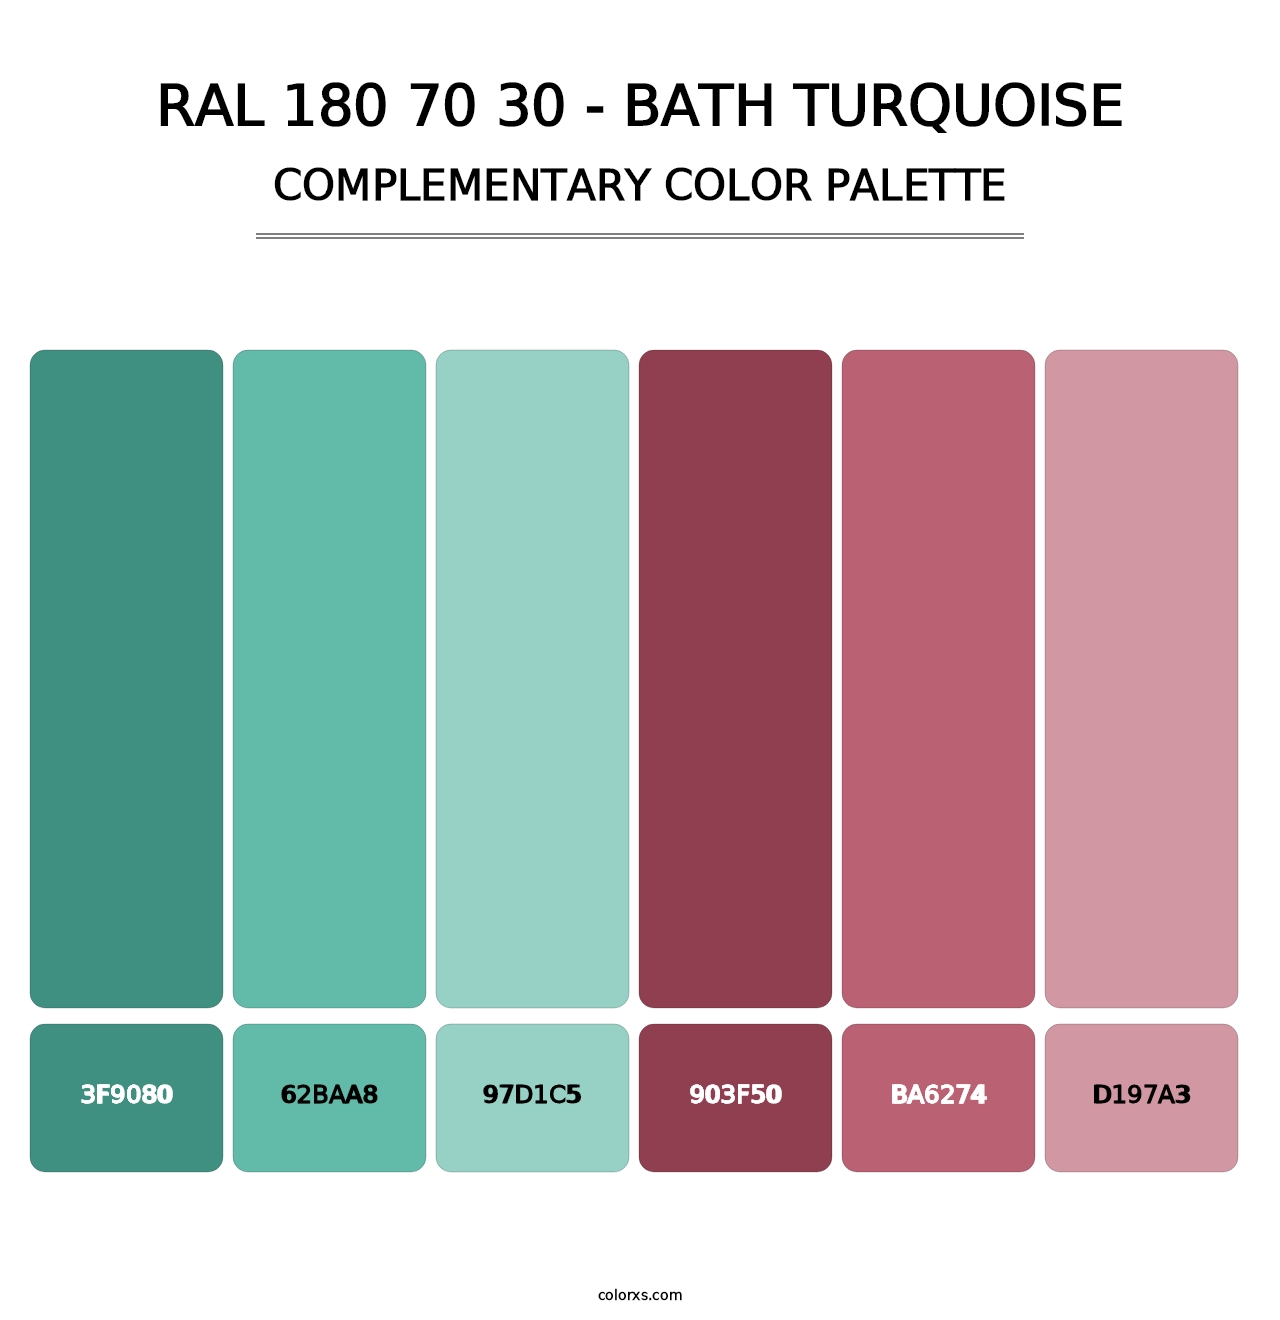 RAL 180 70 30 - Bath Turquoise - Complementary Color Palette